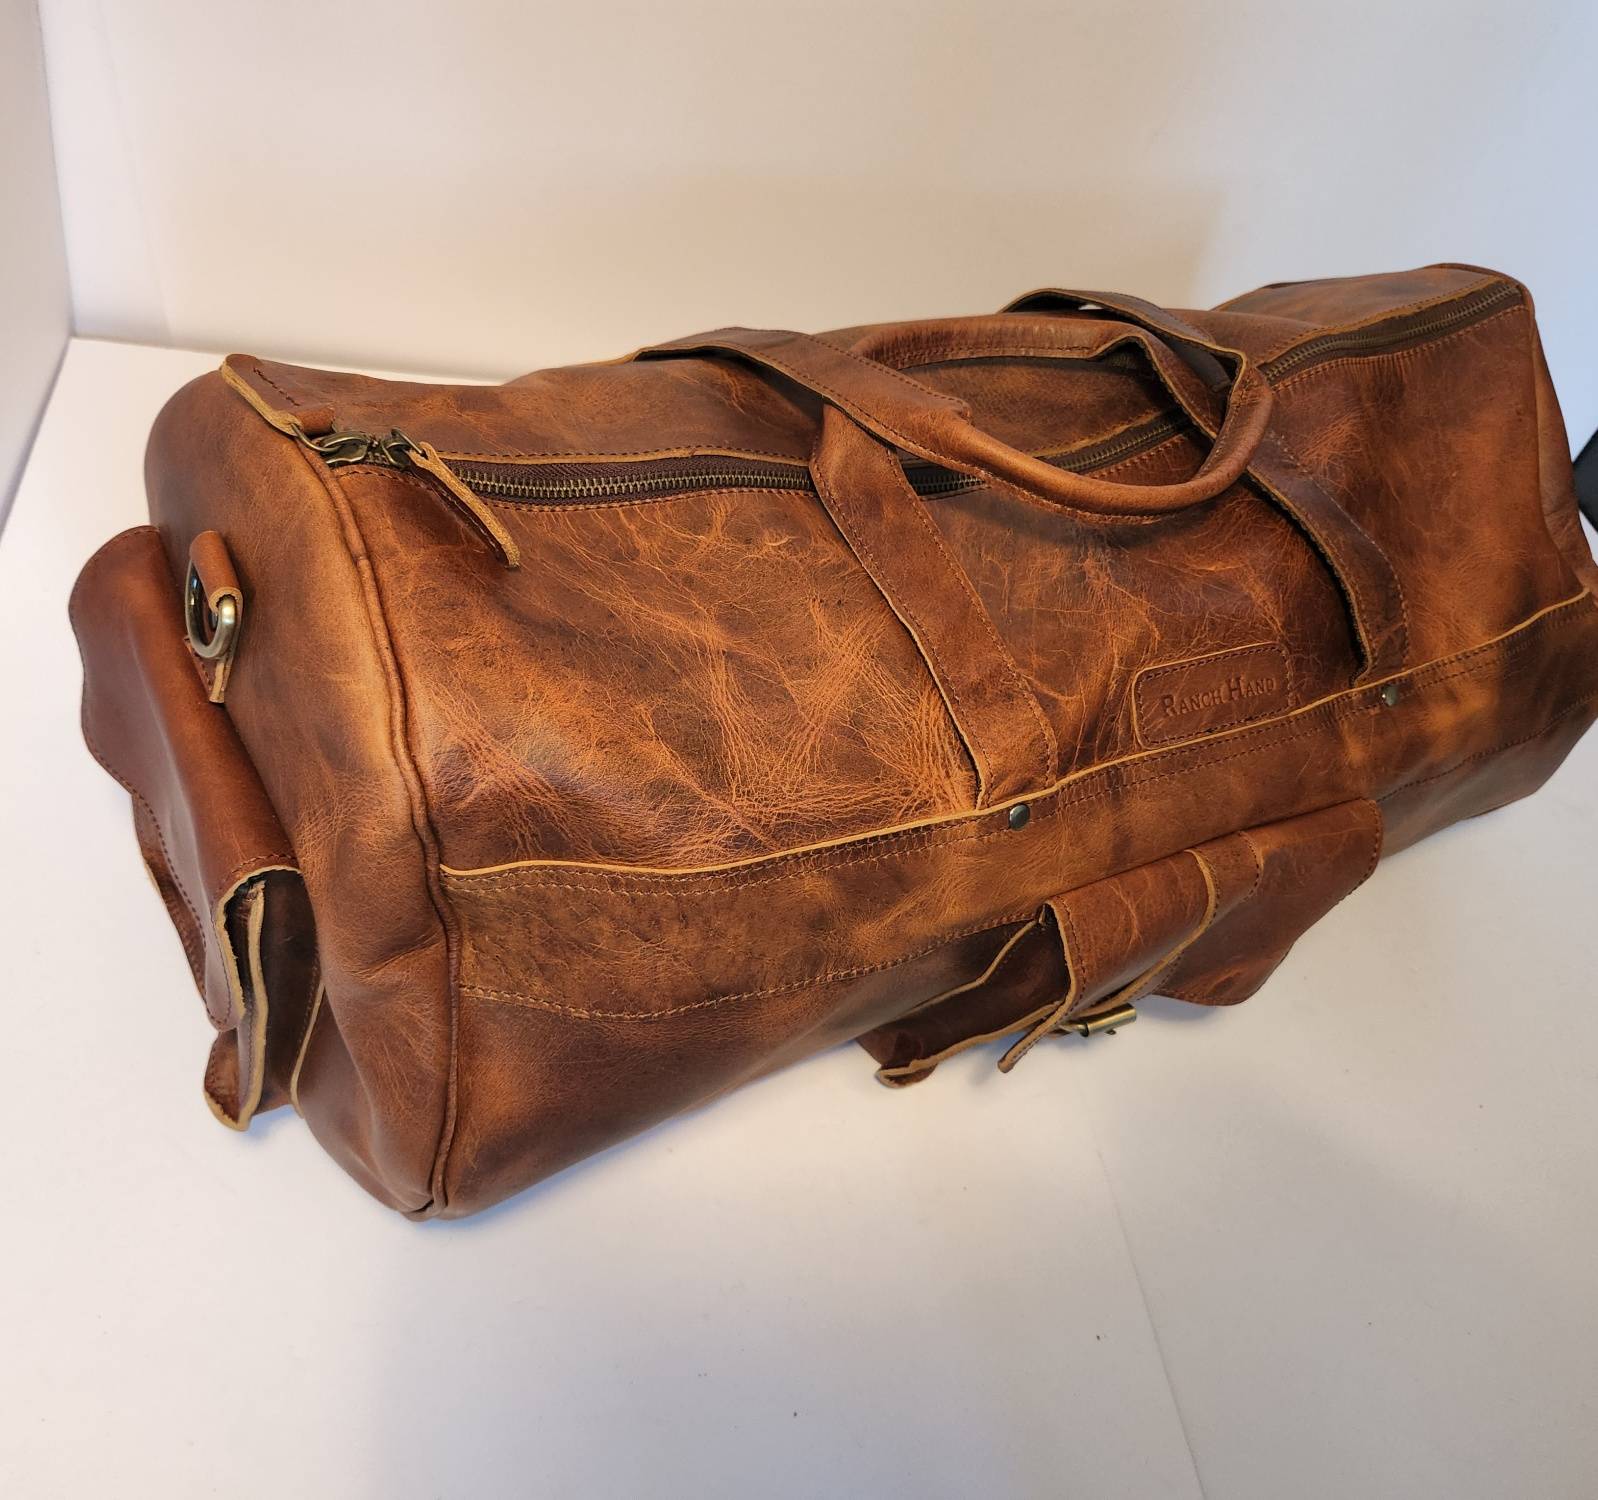 Distressed Leather Duffel Bag / Travel Bag- The Signature - Ranch